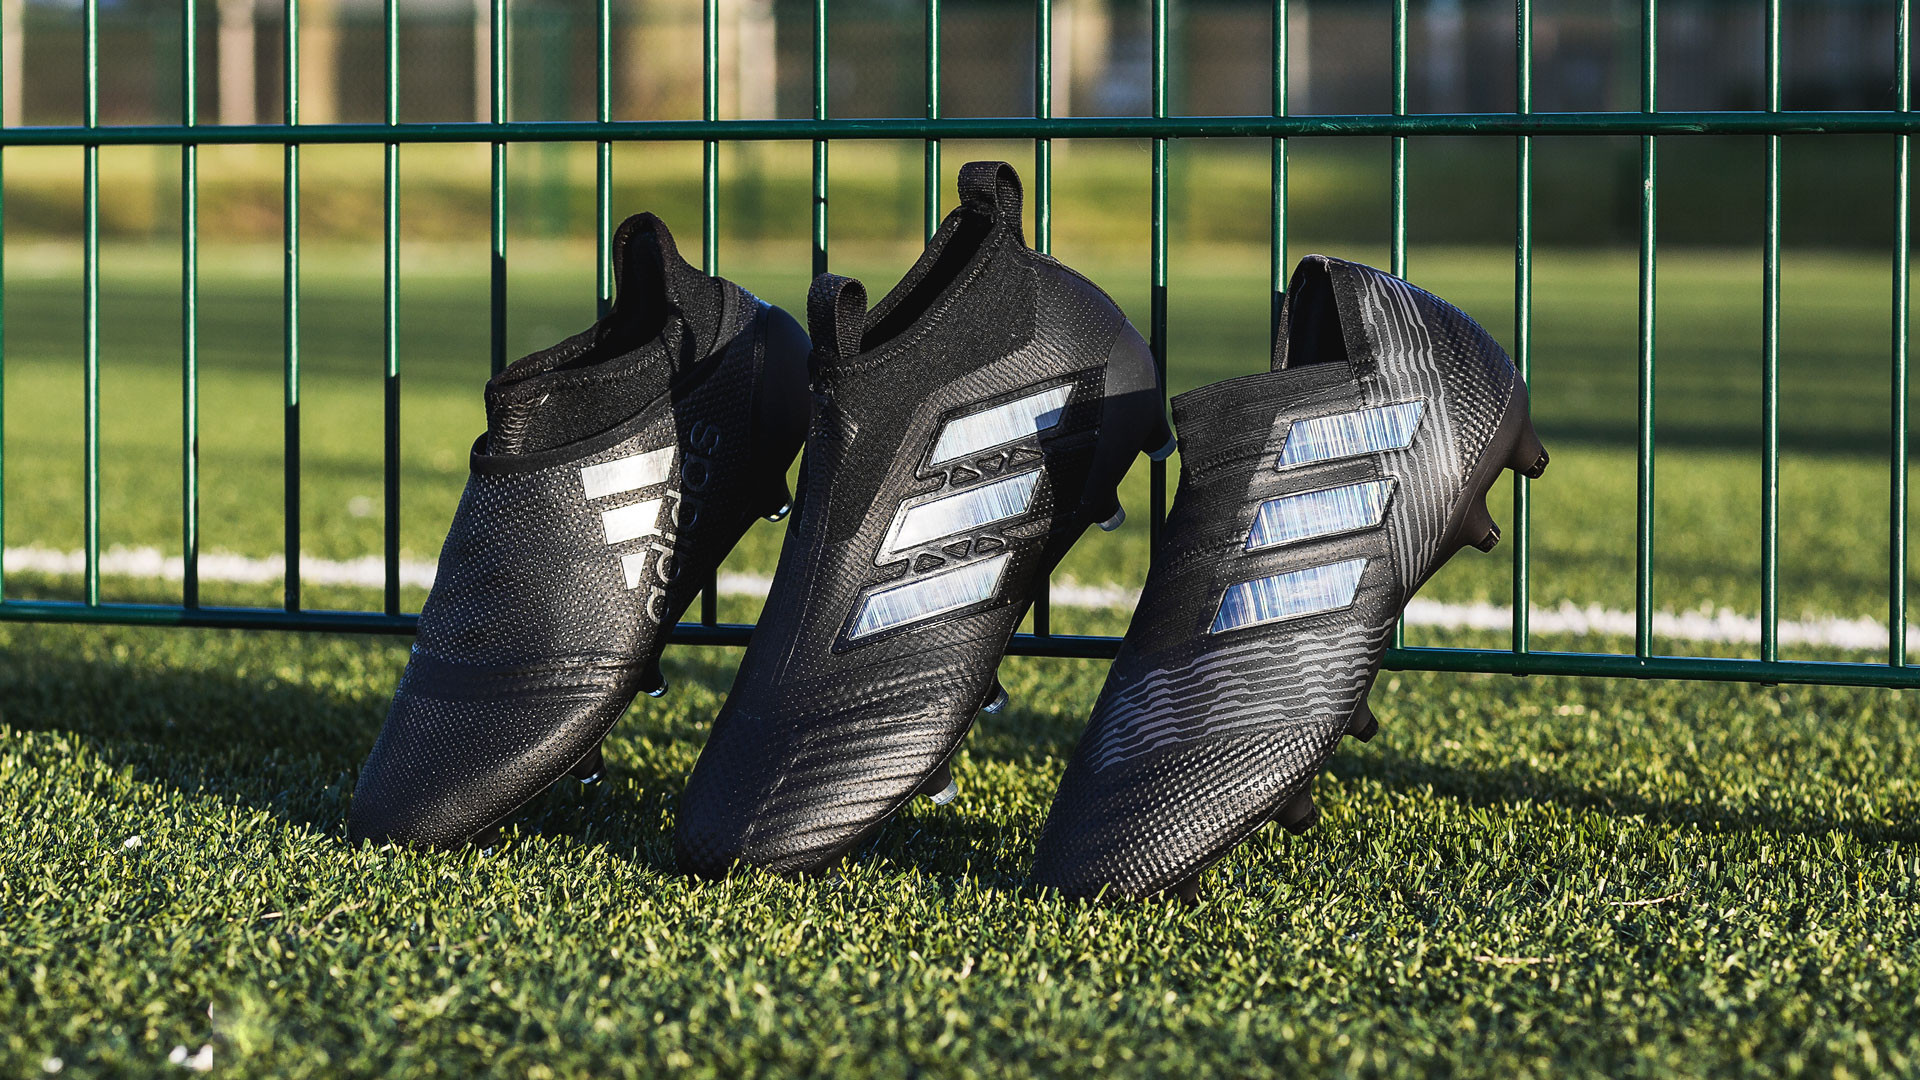 adidas magnetic storm pack